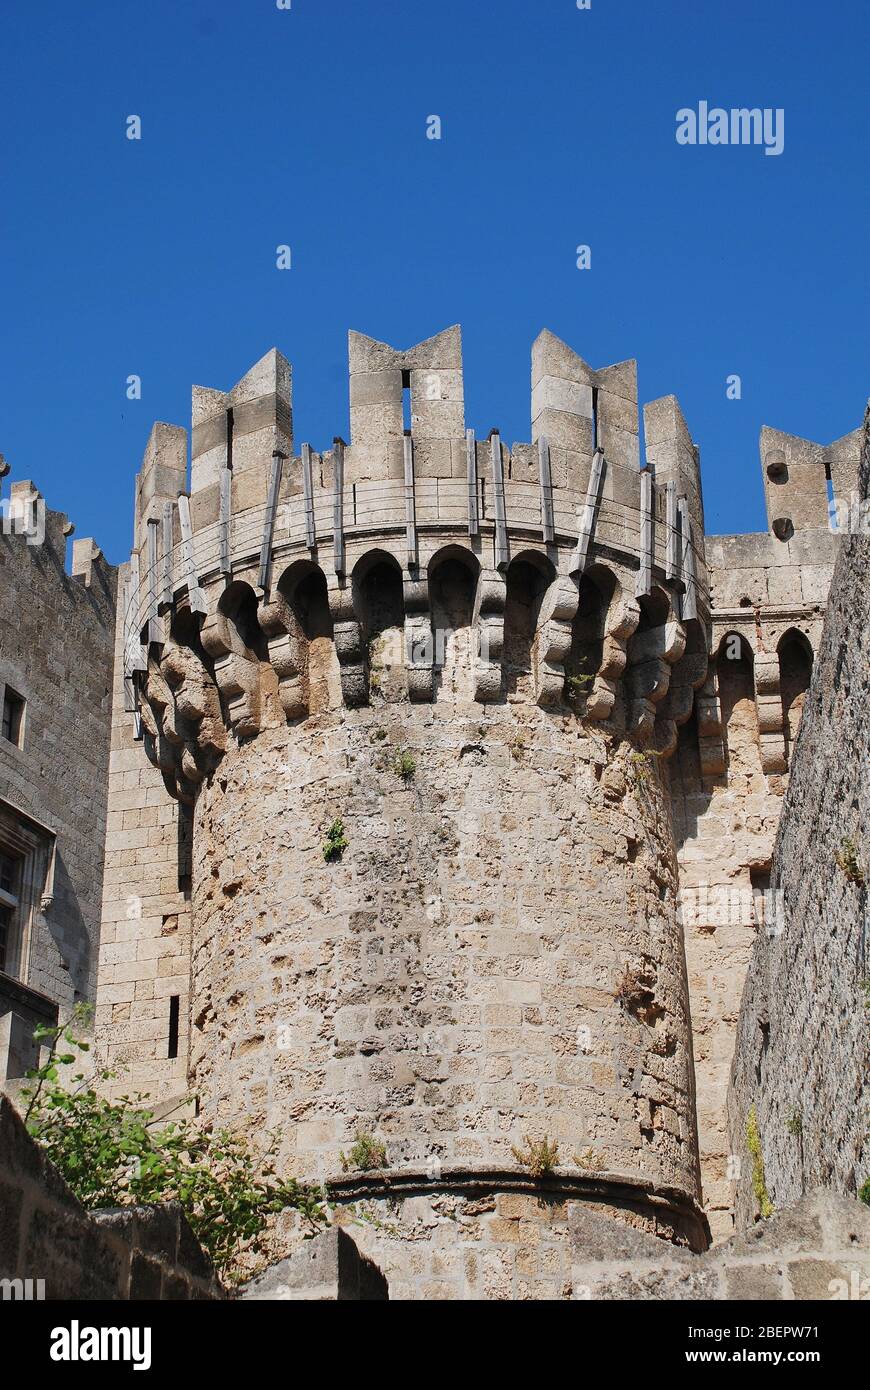 A turret on the medieval fortified wall in Rhodes Old Town on the Greek island of Rhodes. Stock Photo